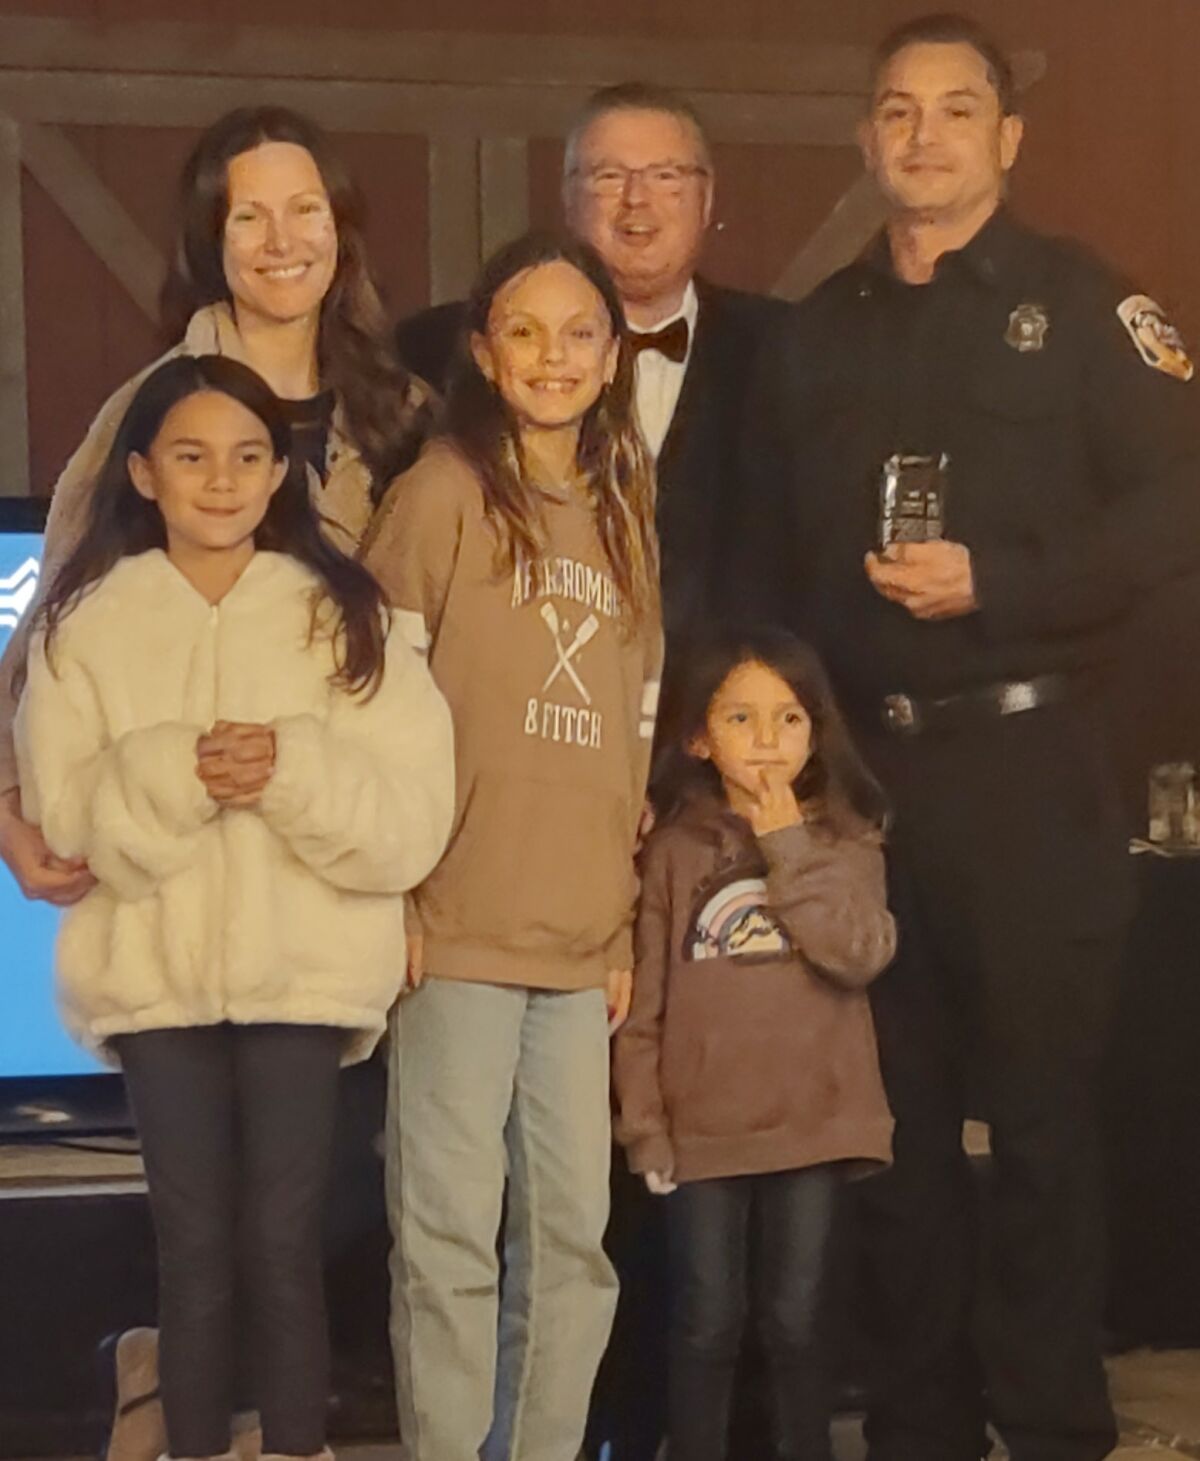 Firefighter of the Year William Grillo, right, with his wife, Vanessa, daughters Mila, Matea and Mari, and Paul Zawilenski.